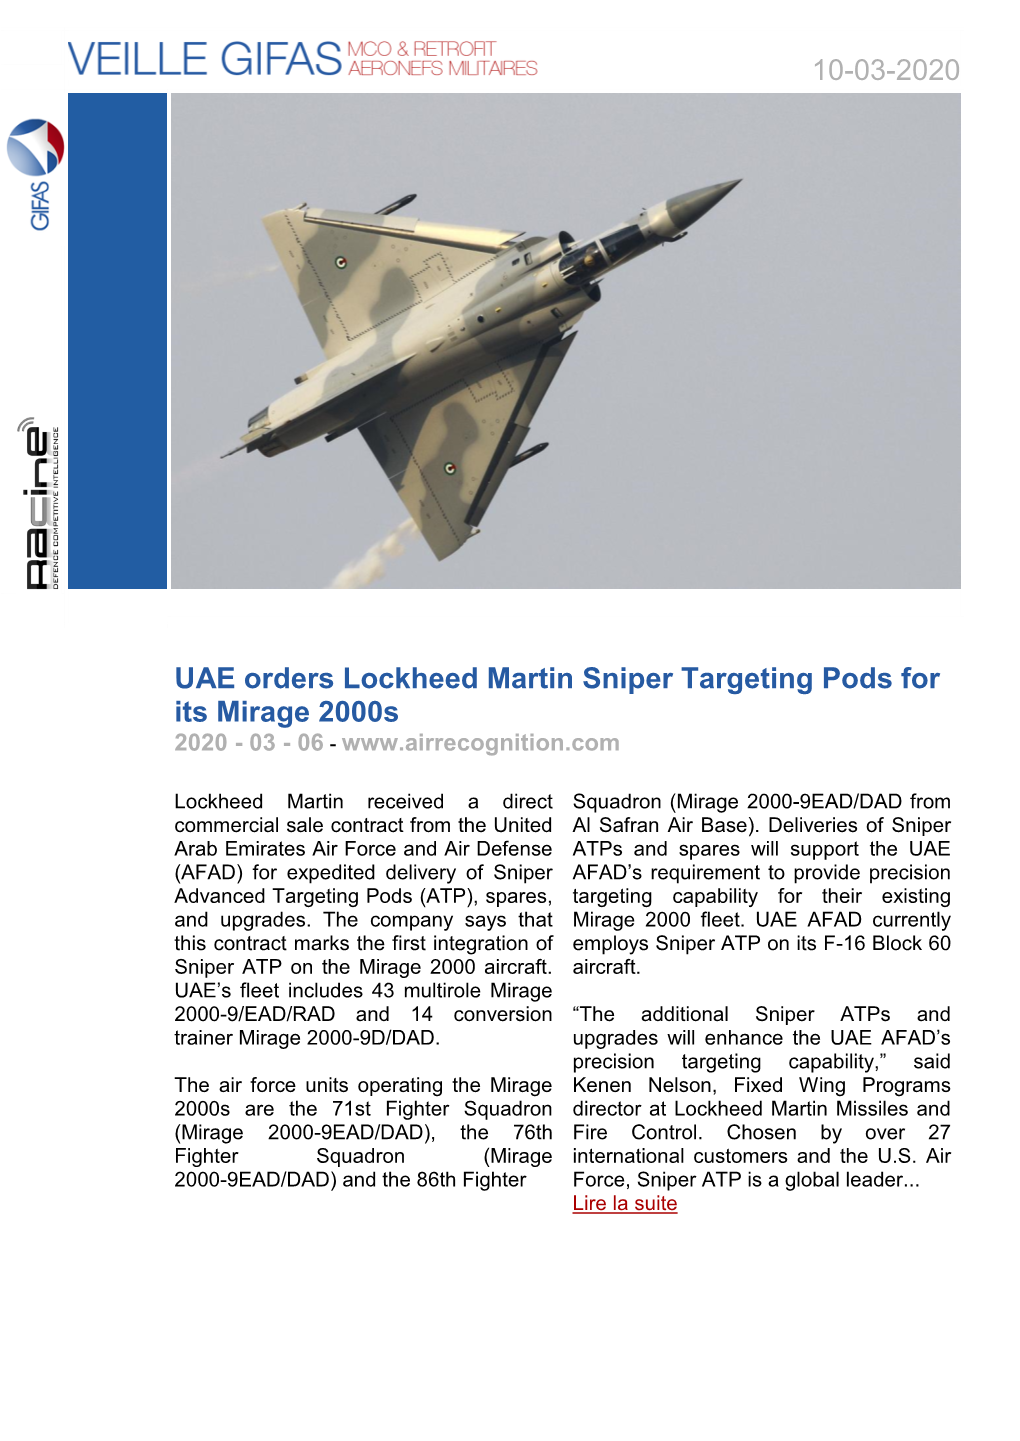 10-03-2020 UAE Orders Lockheed Martin Sniper Targeting Pods for Its